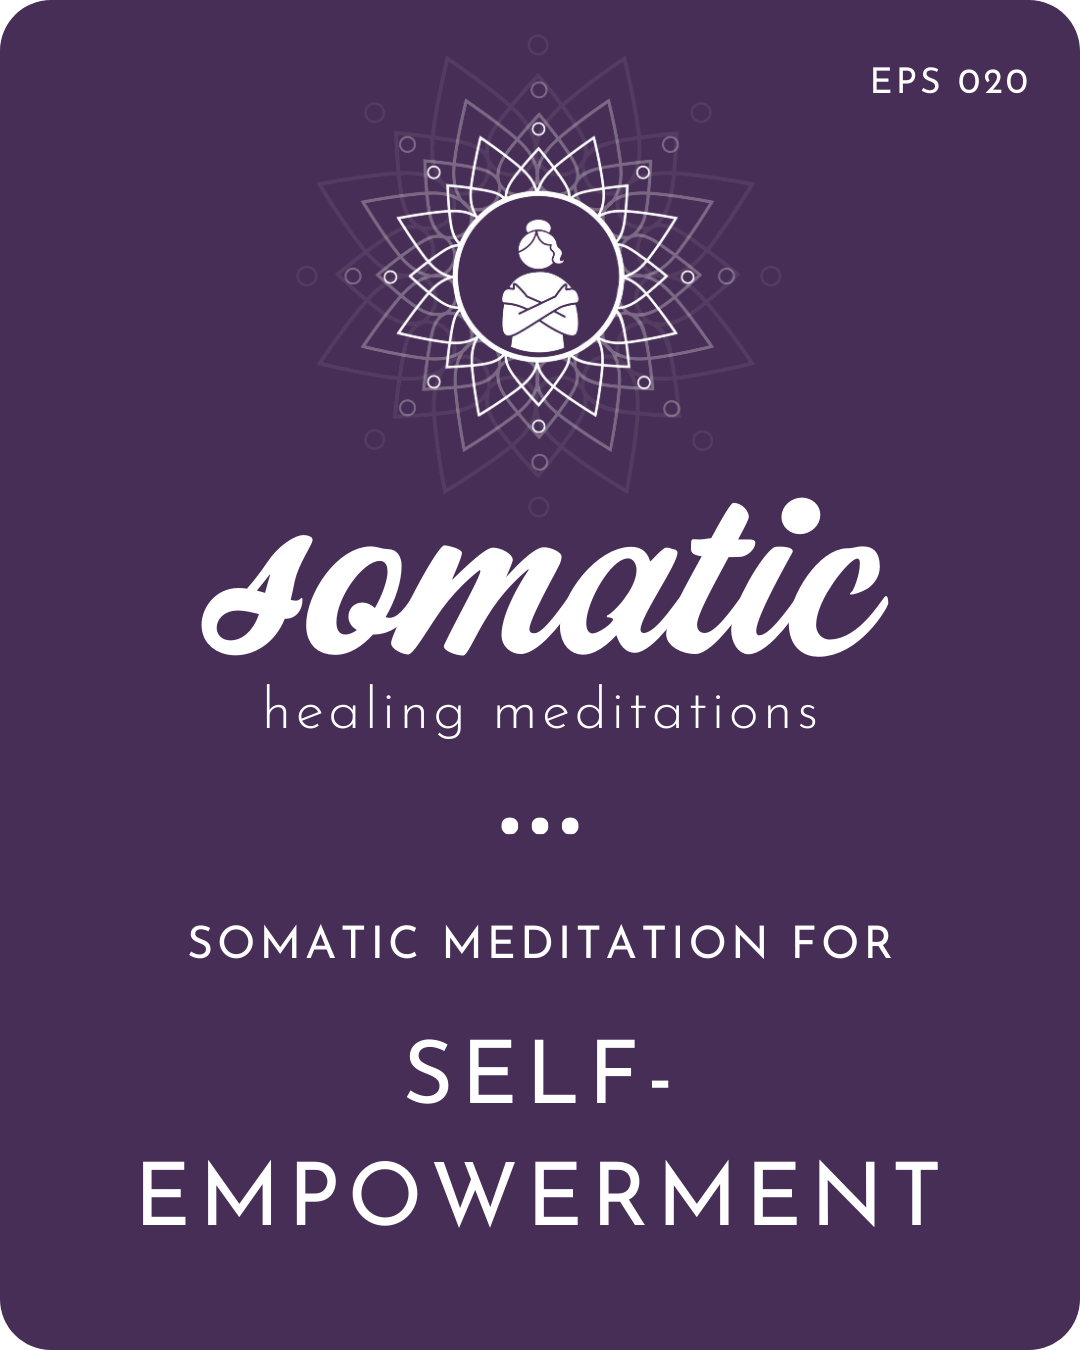 Somatic Meditation for Self-Empowerment (using Havening and Iffirmations)!